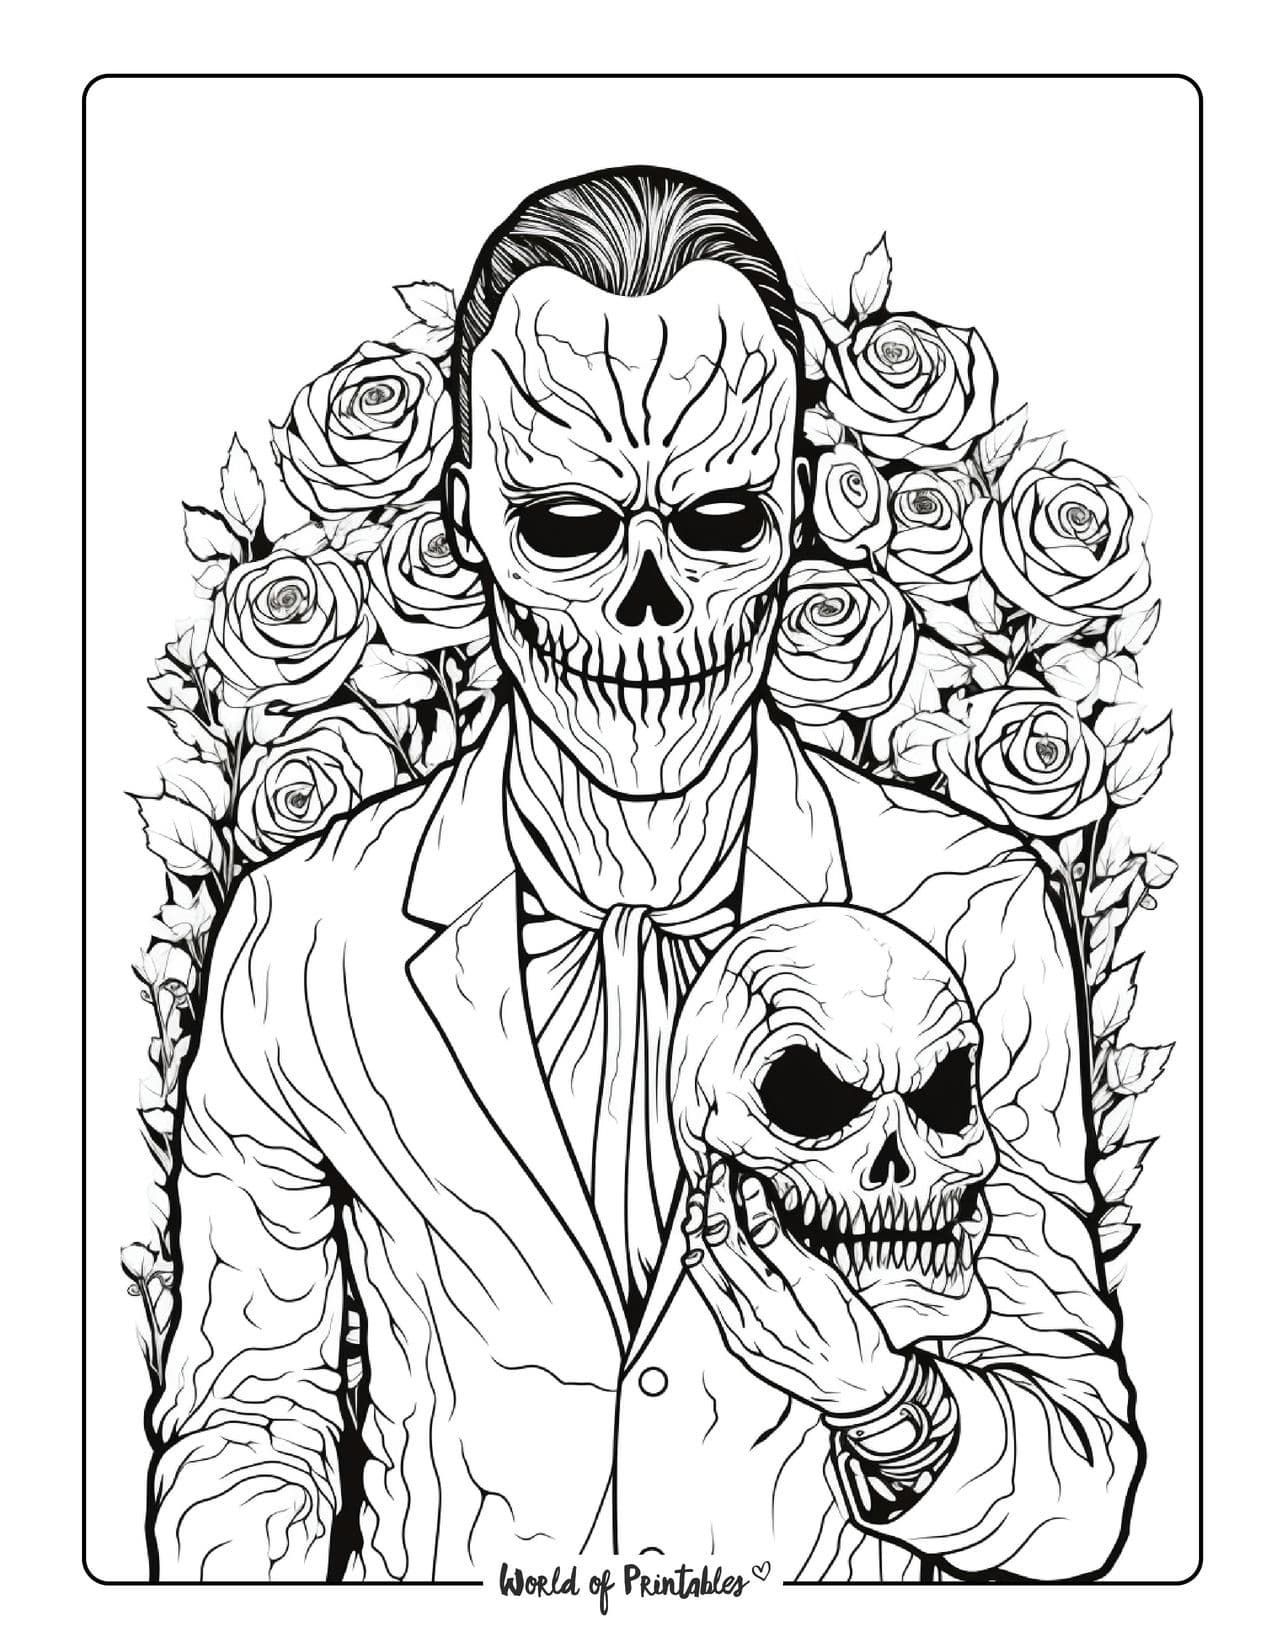 Horror coloring pages for adults monster coloring pages coloring pages pumpkin coloring pages